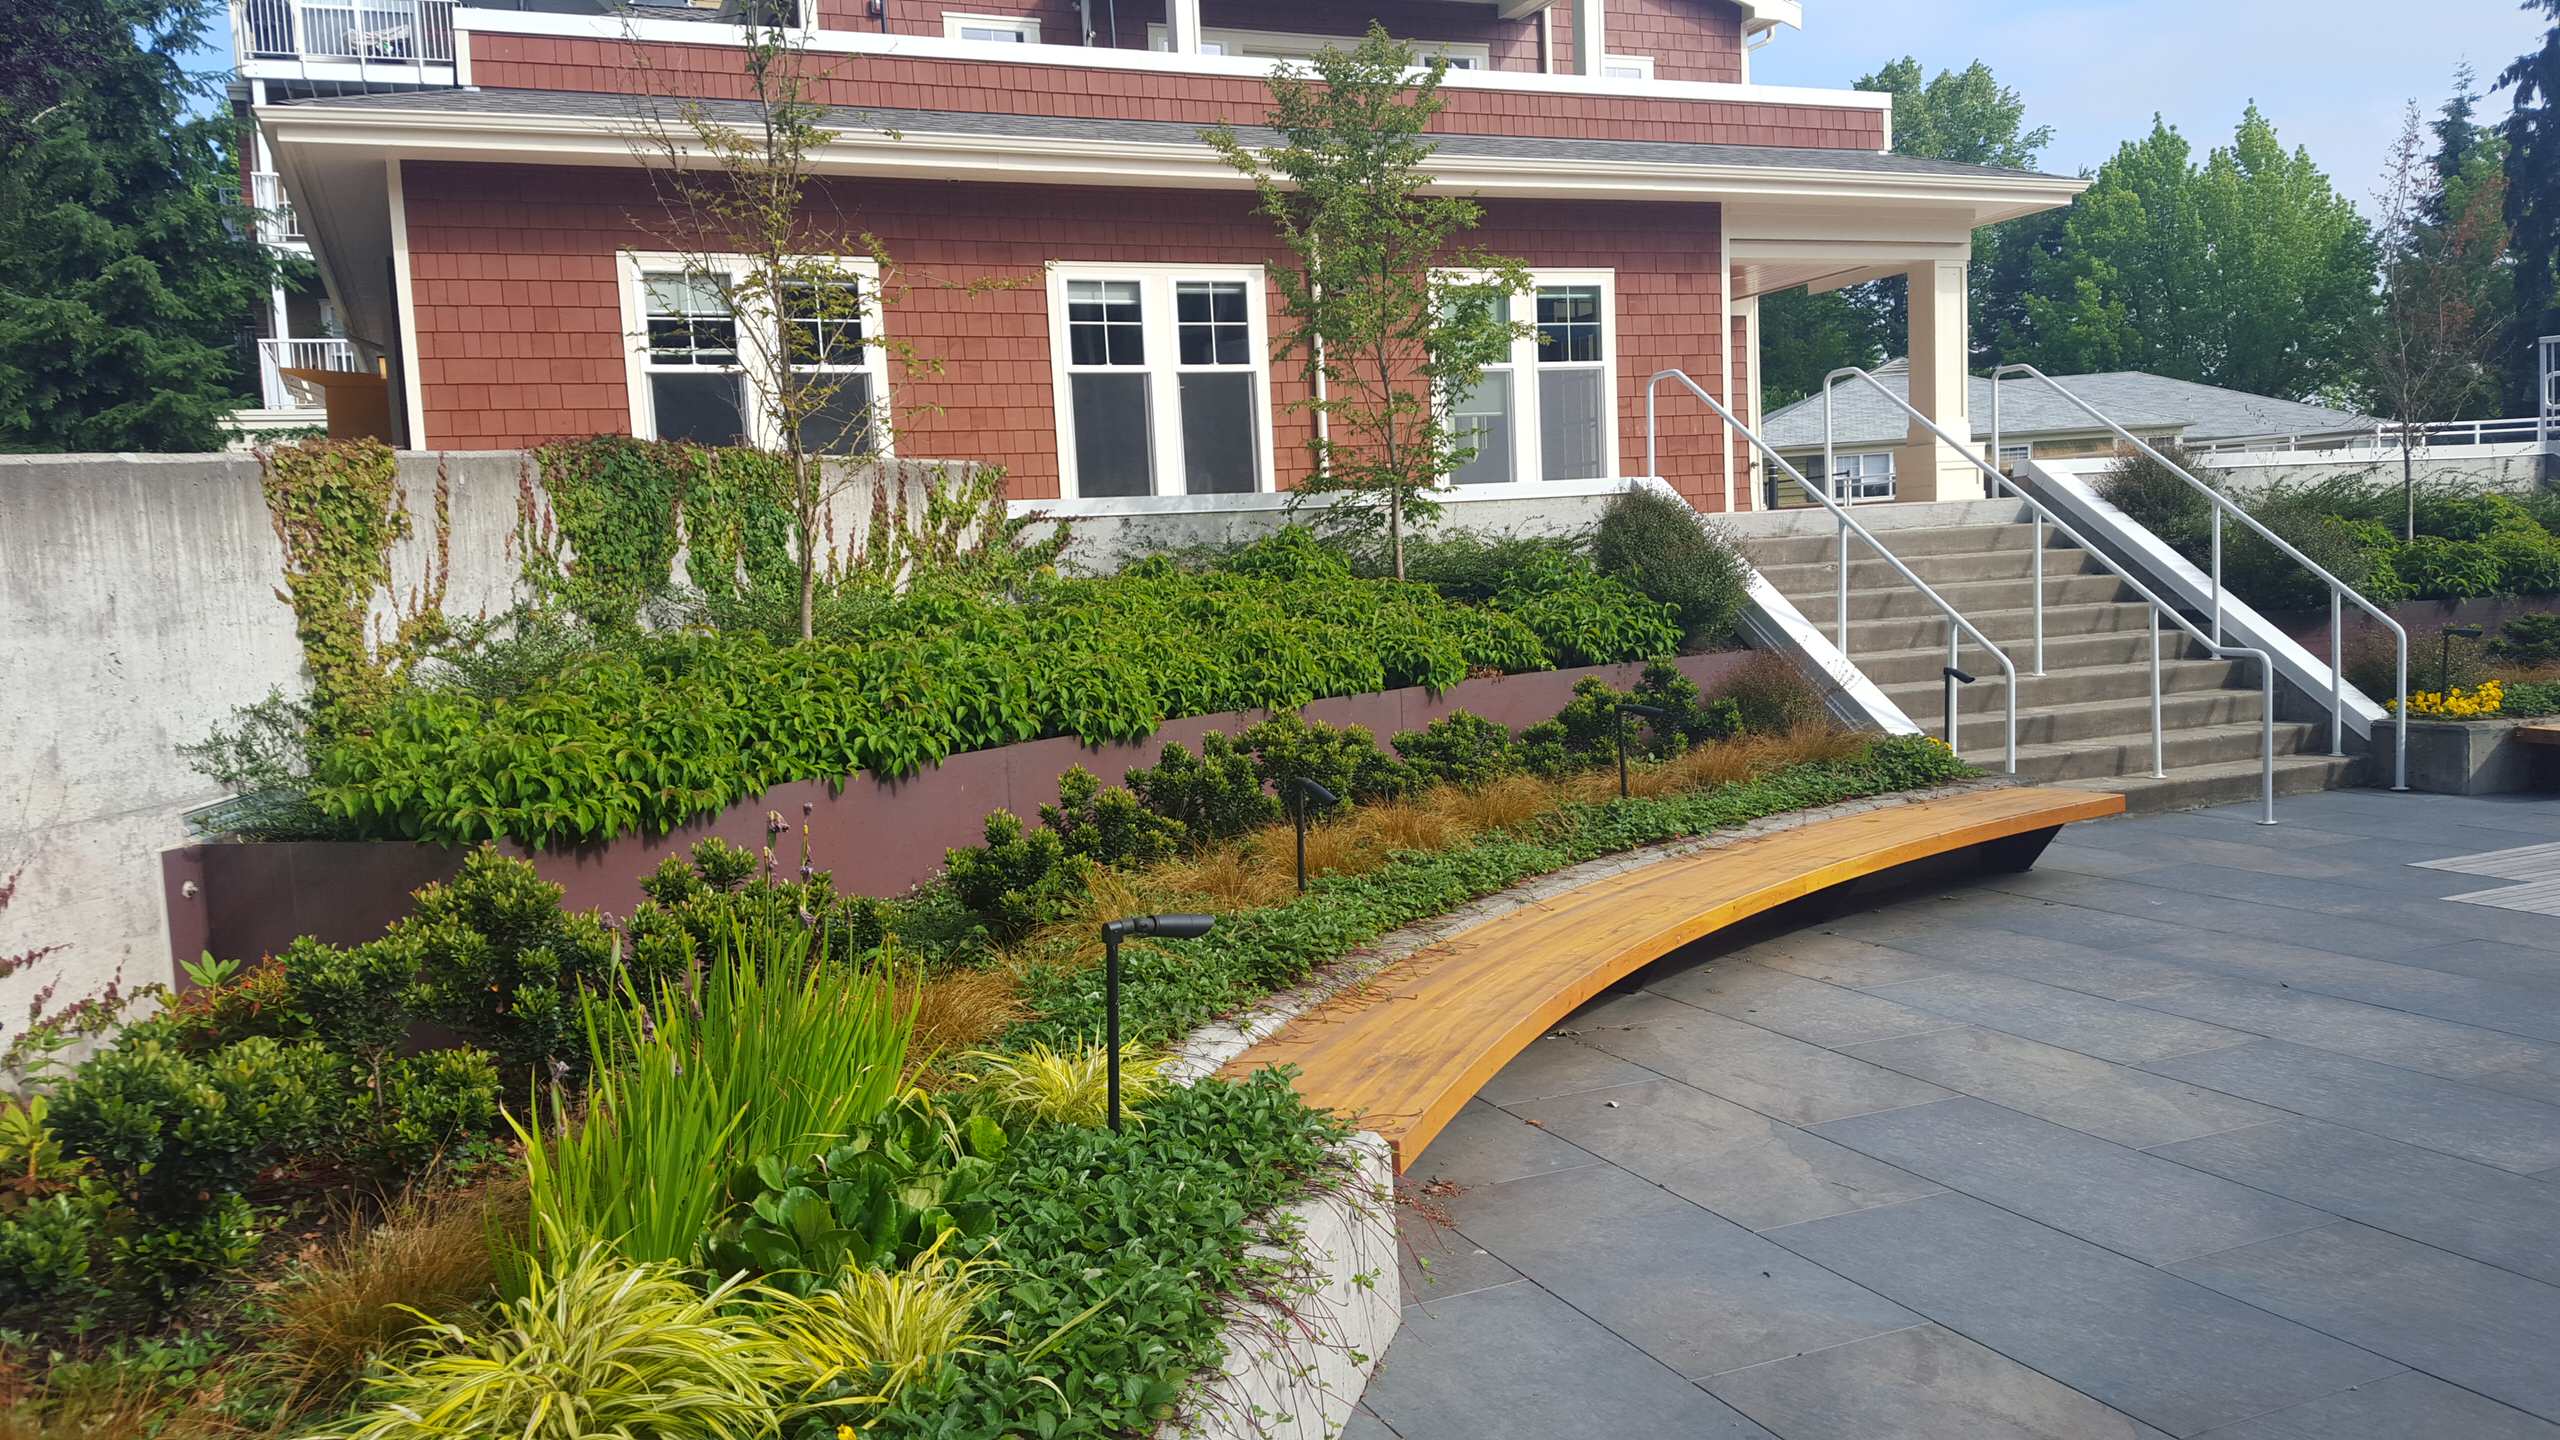 Terraced planting beds and paved court